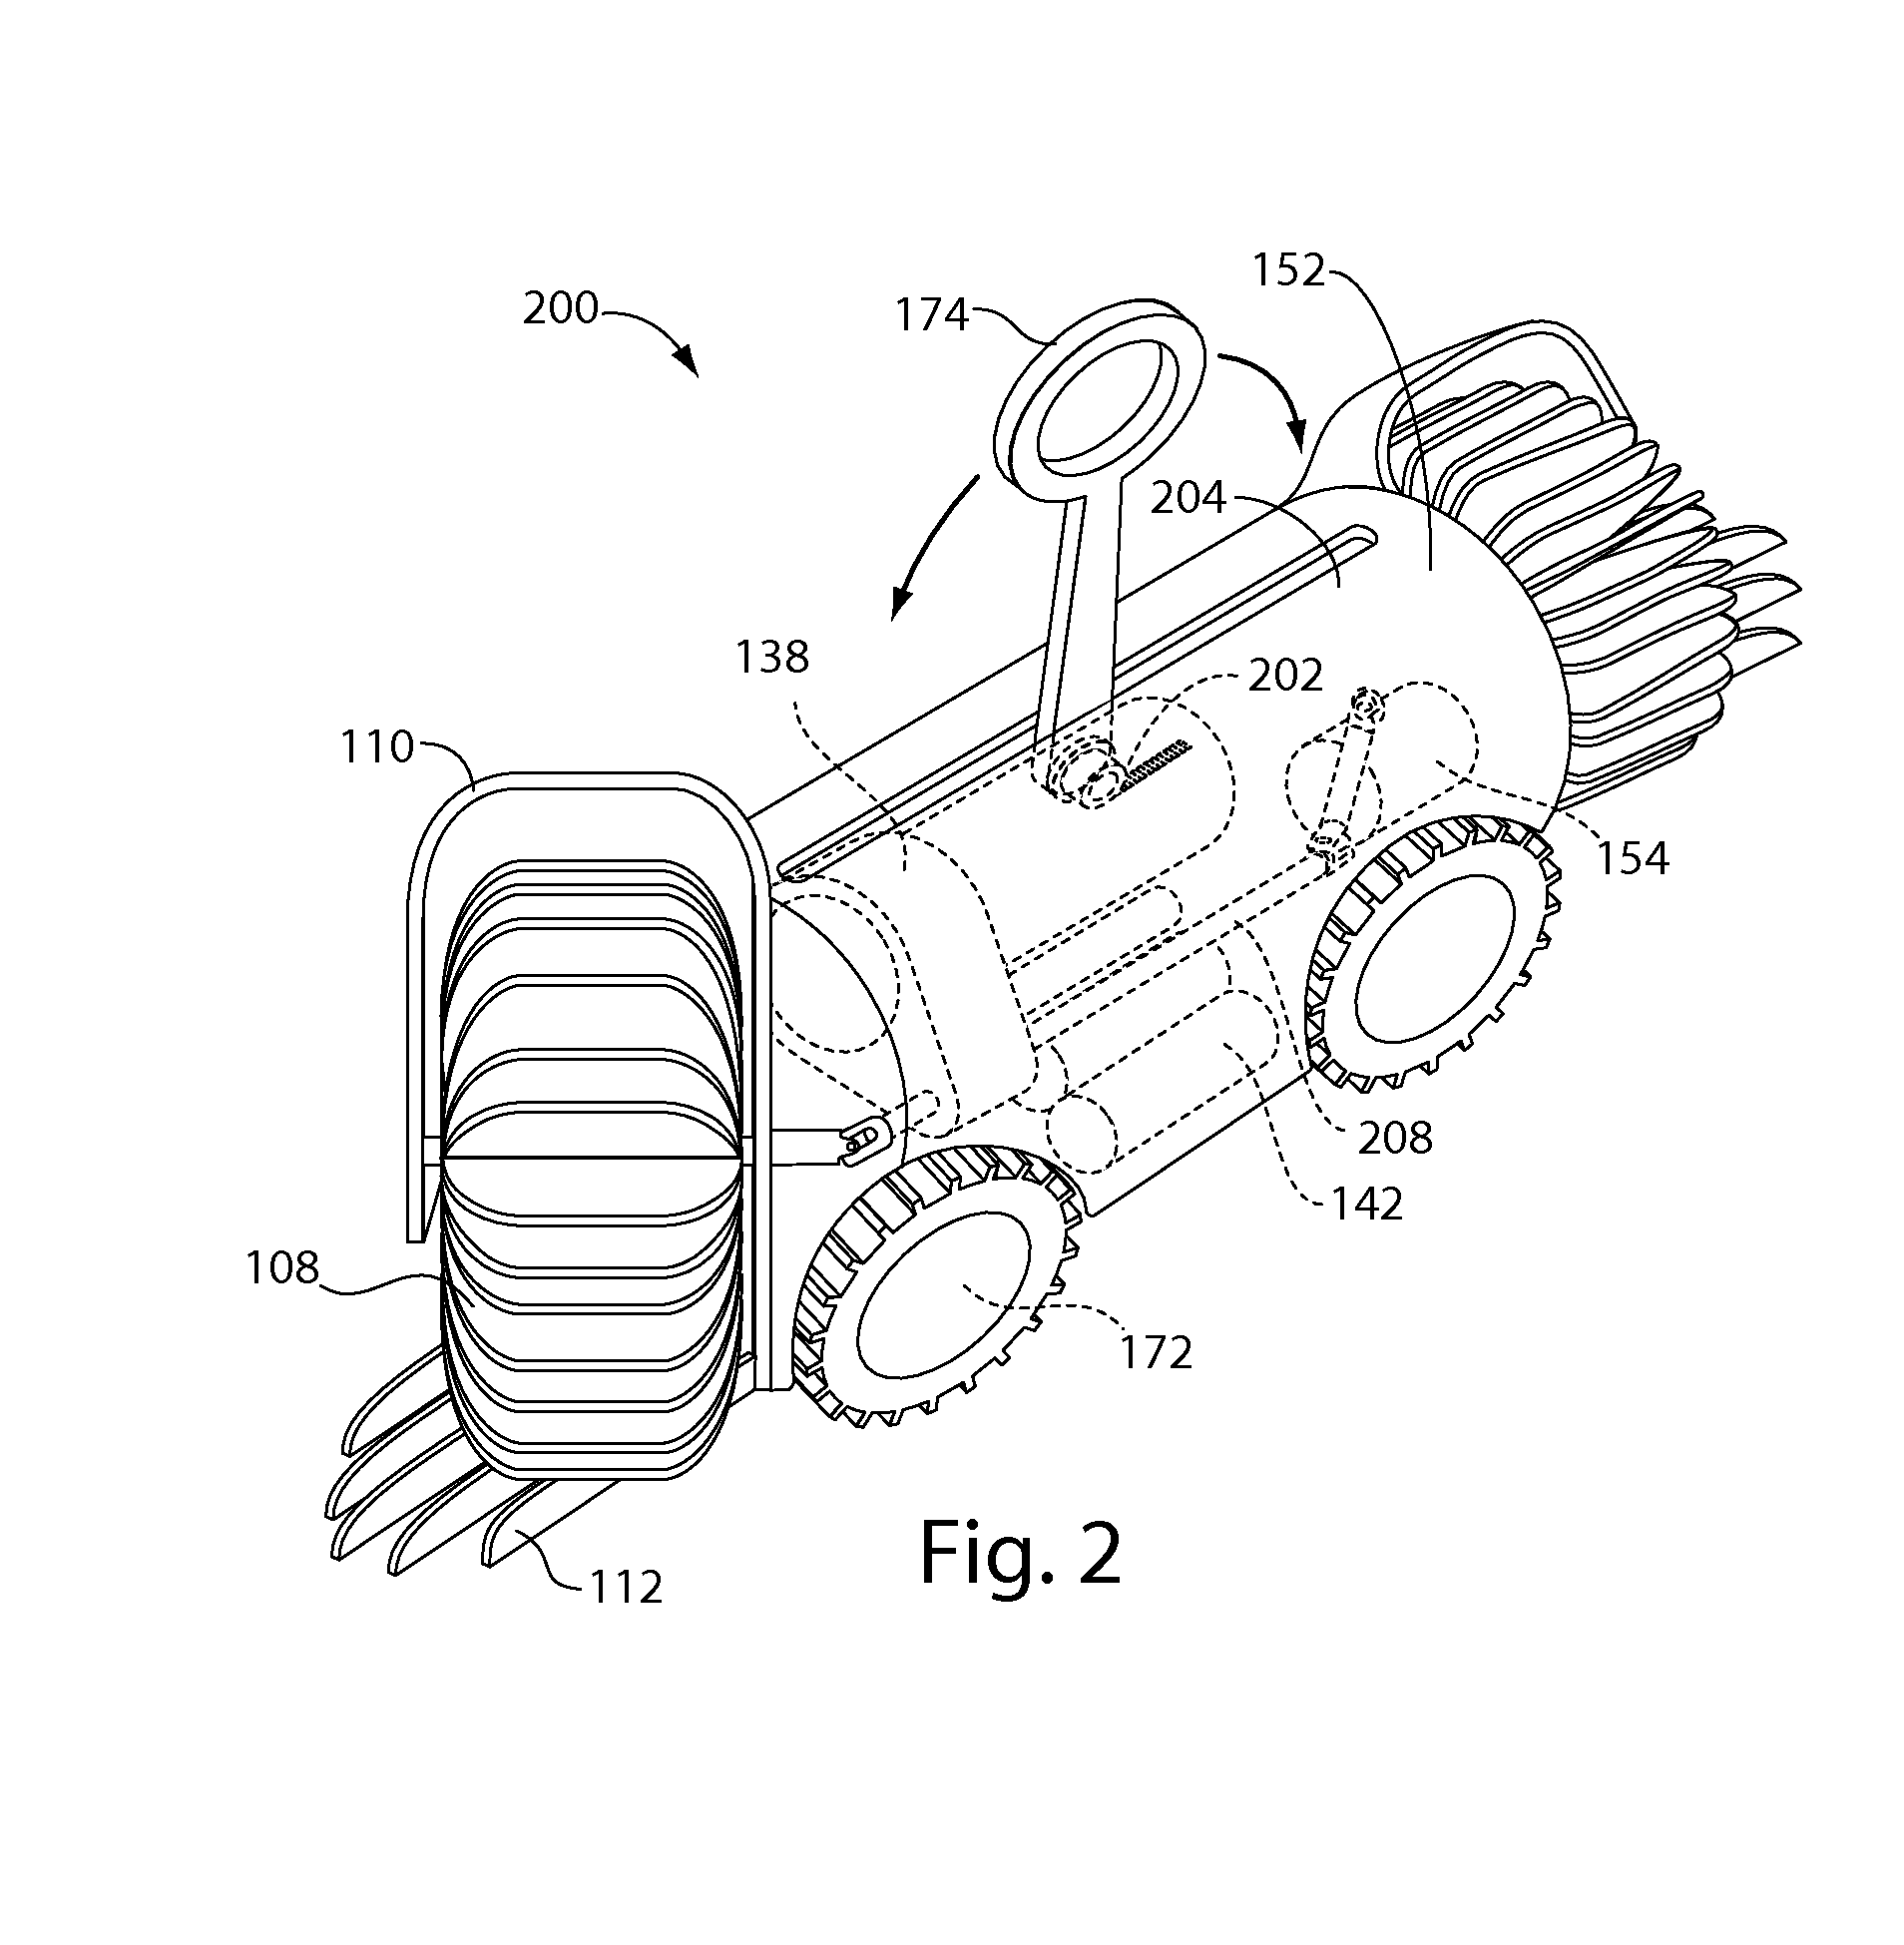 Systems and methods for robotic gutter cleaning along an axis of rotation